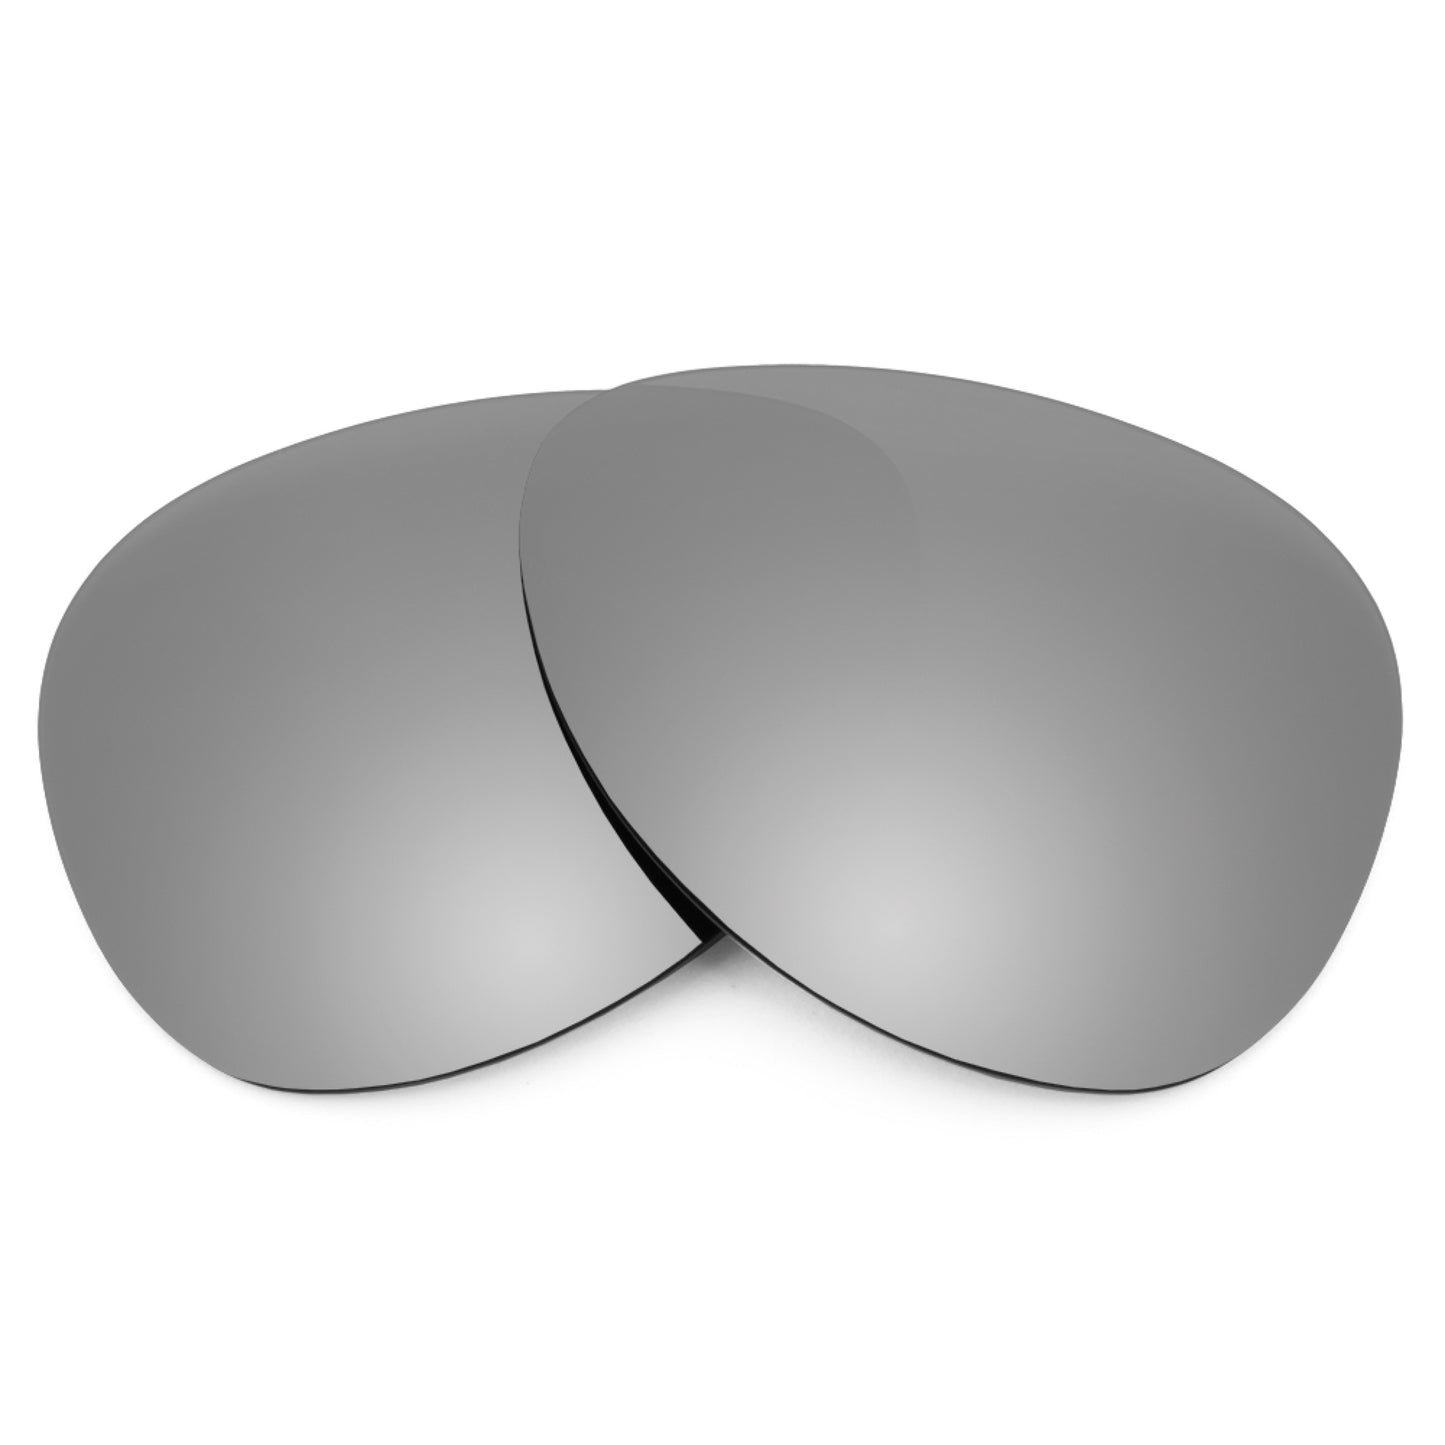 Revant replacement lenses for Ray-Ban Aviator RB3025 58mm Polarized Titanium